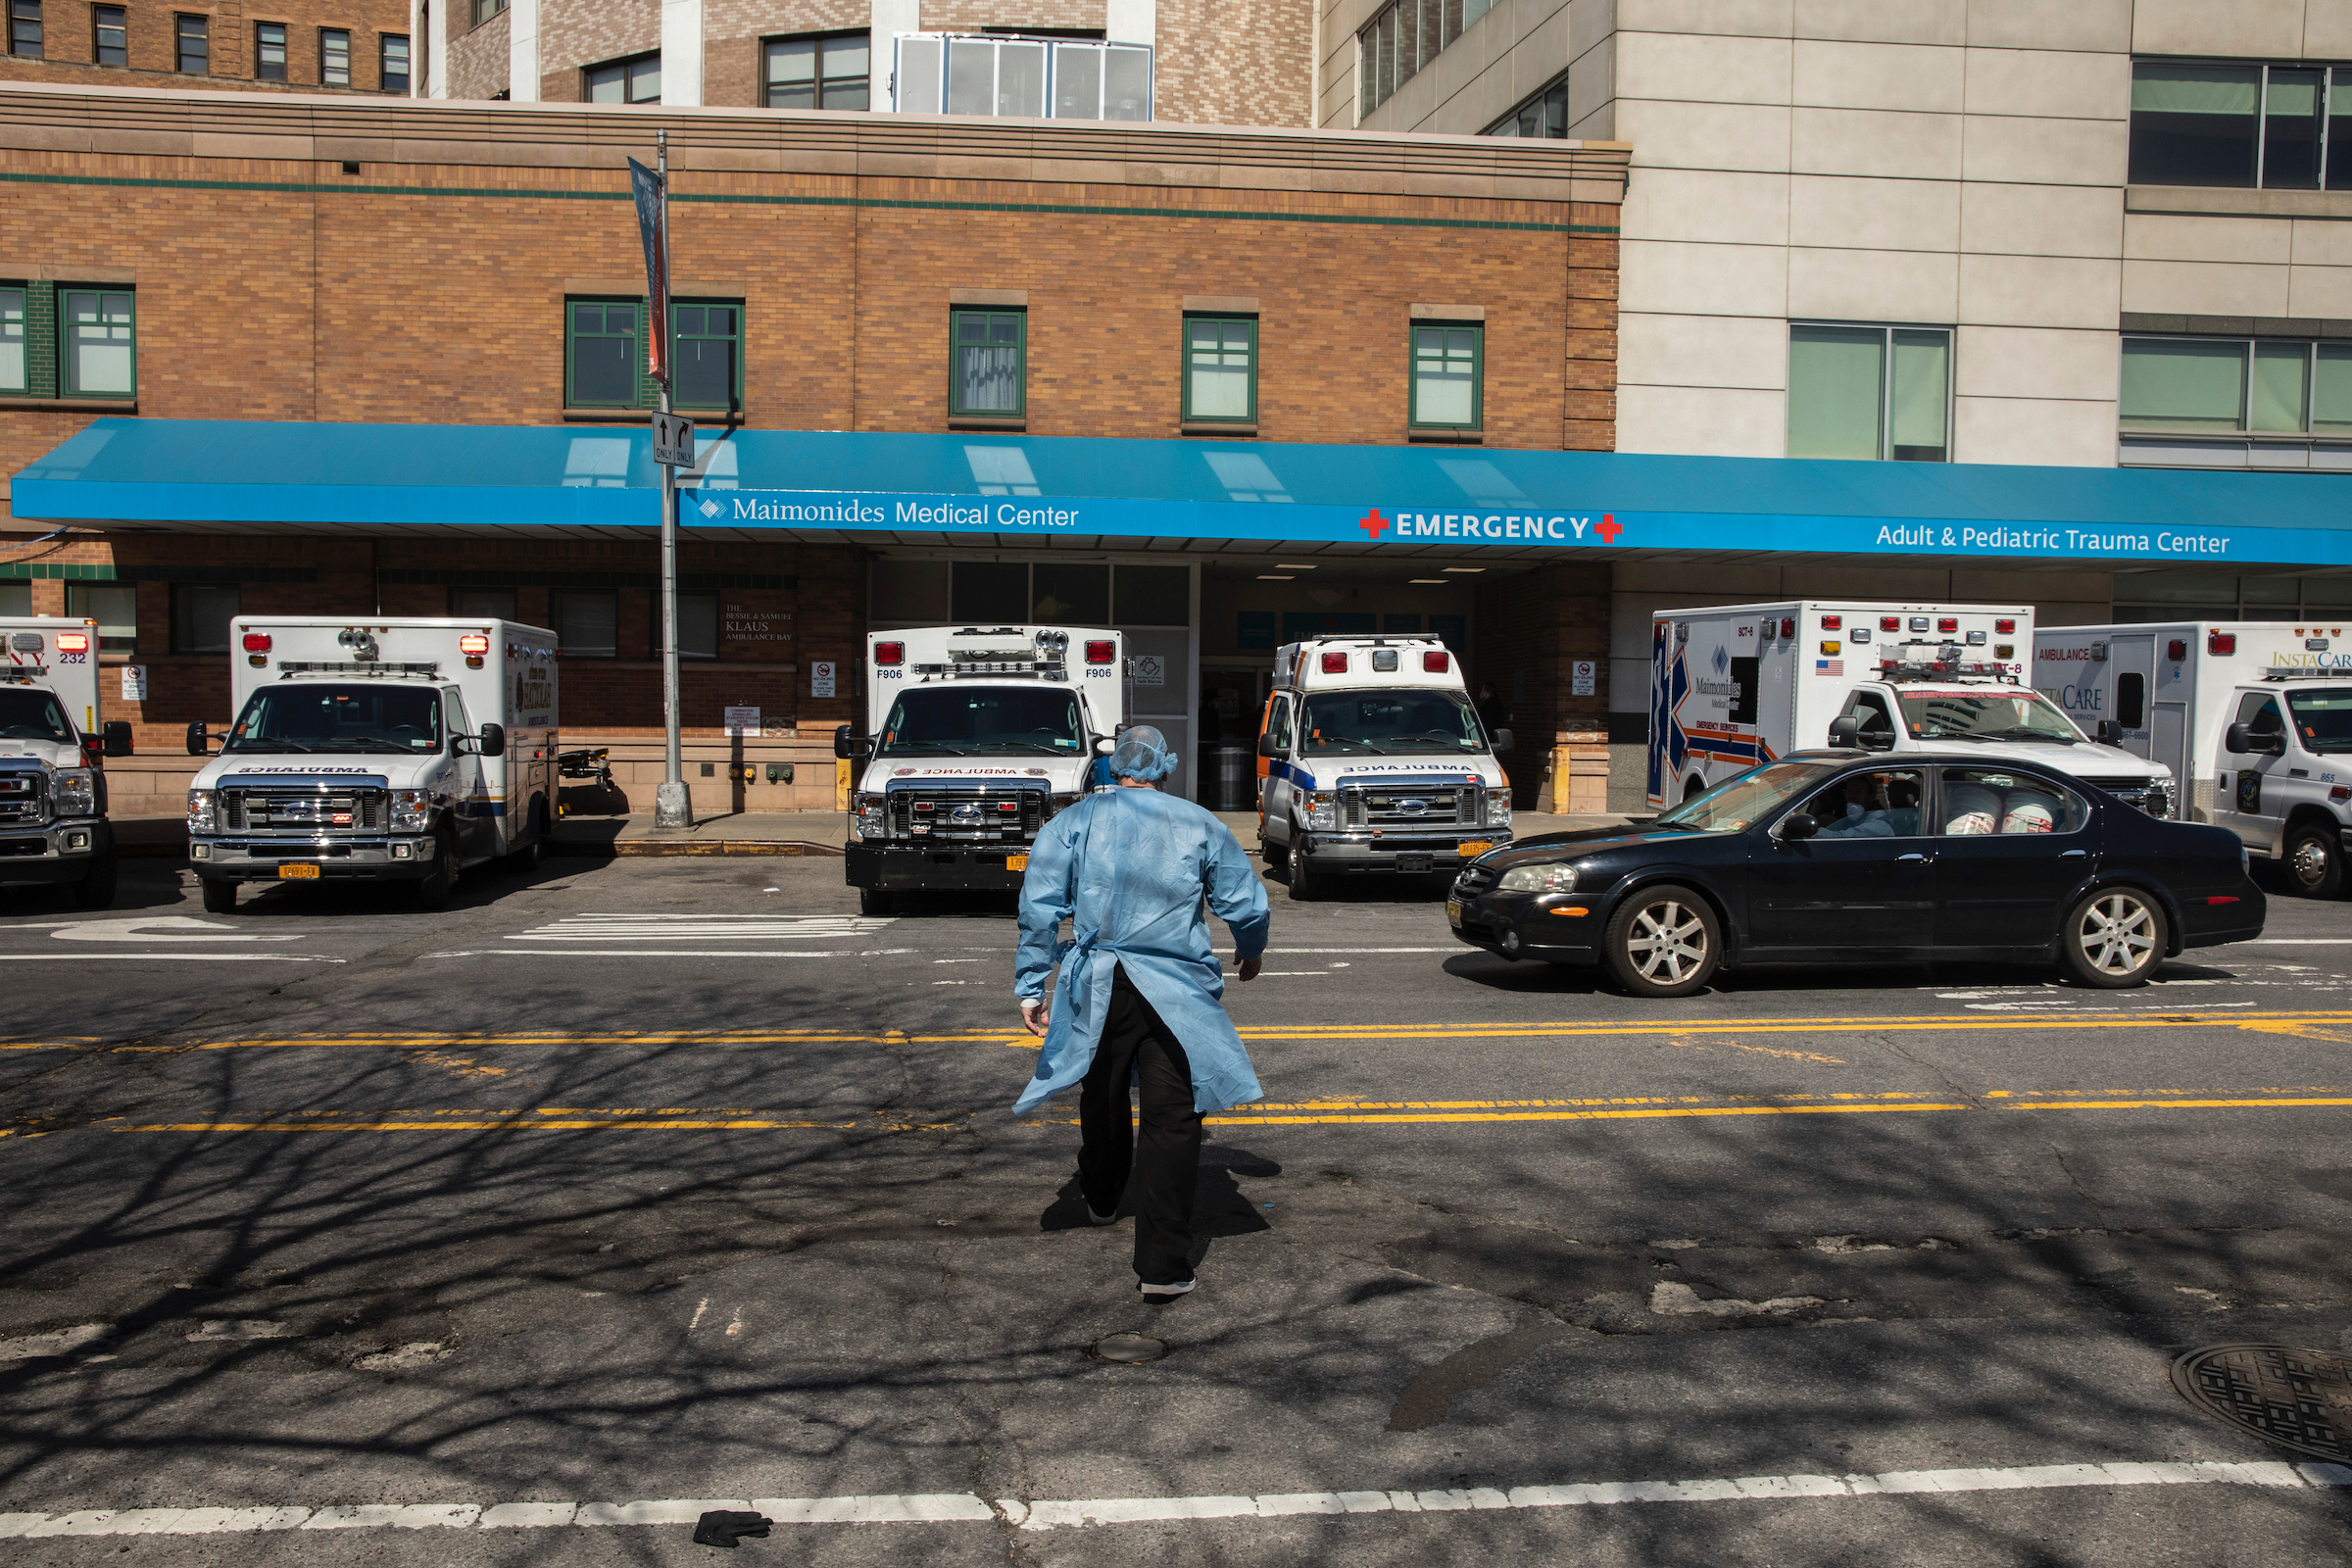 After a break, a technician walks back into Maimonides Medical Center in Brooklyn through the ambulance bay on March 26, 2020.